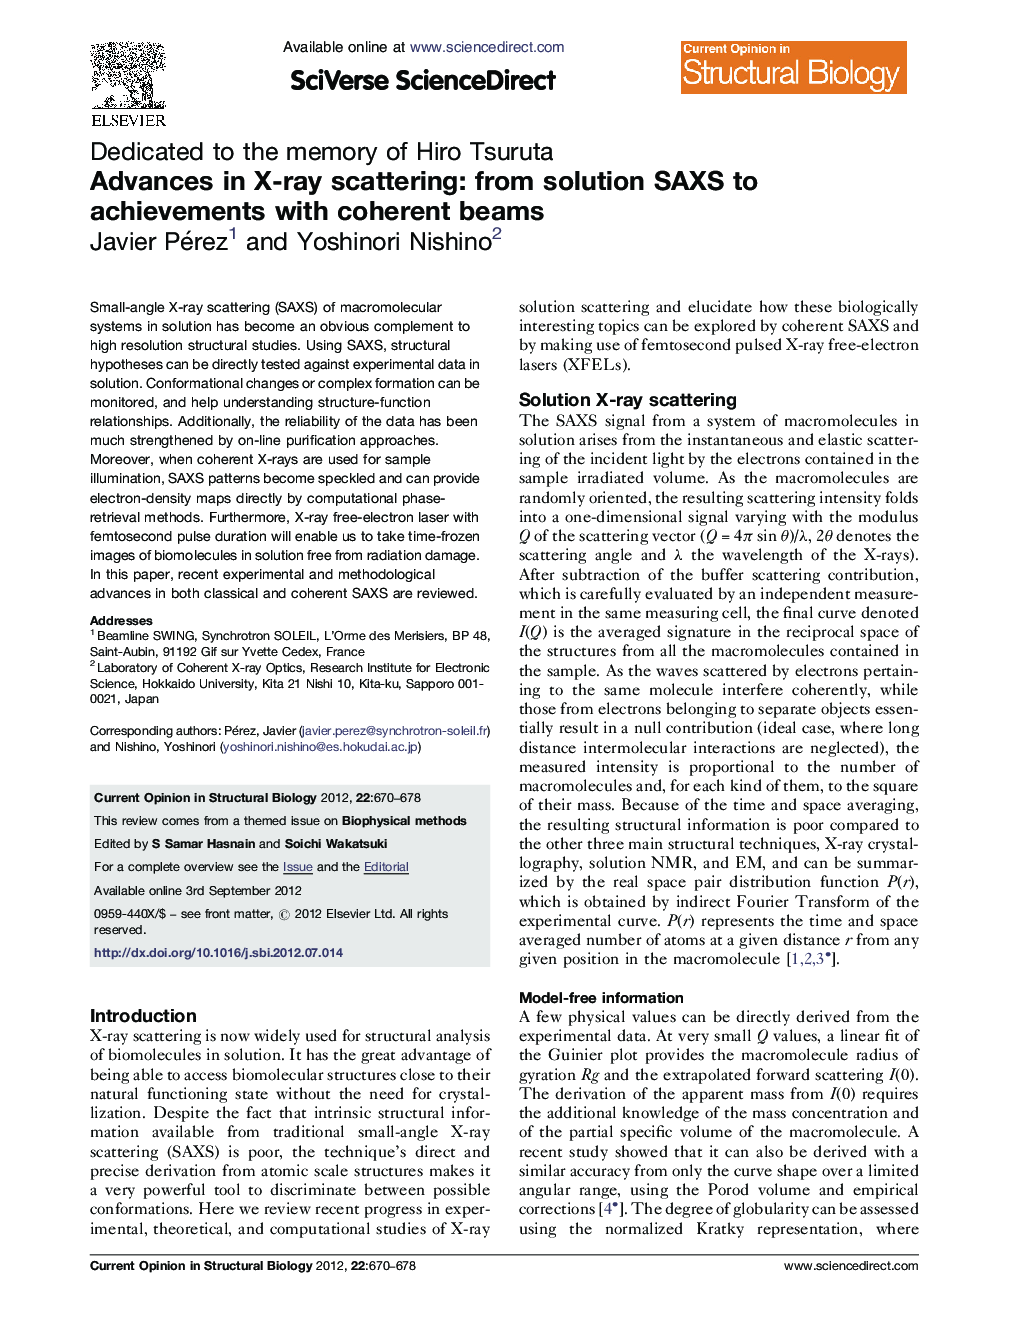 Advances in X-ray scattering: from solution SAXS to achievements with coherent beams